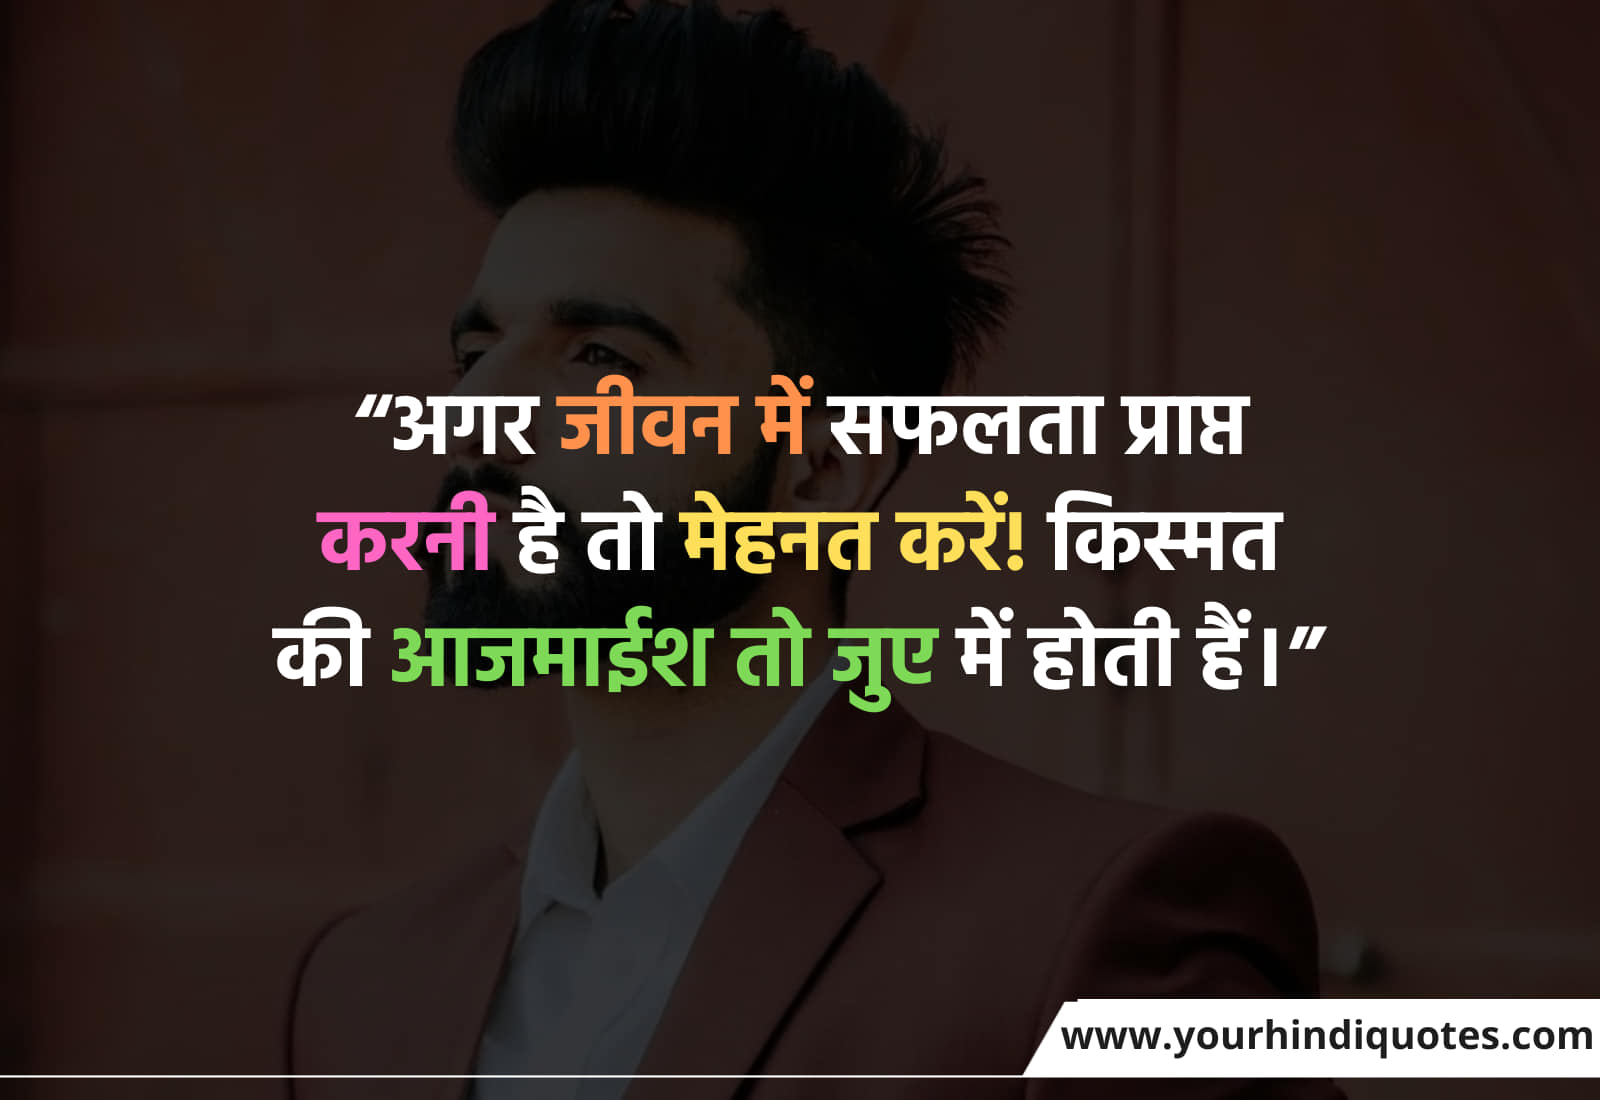 Quotes In Hindi